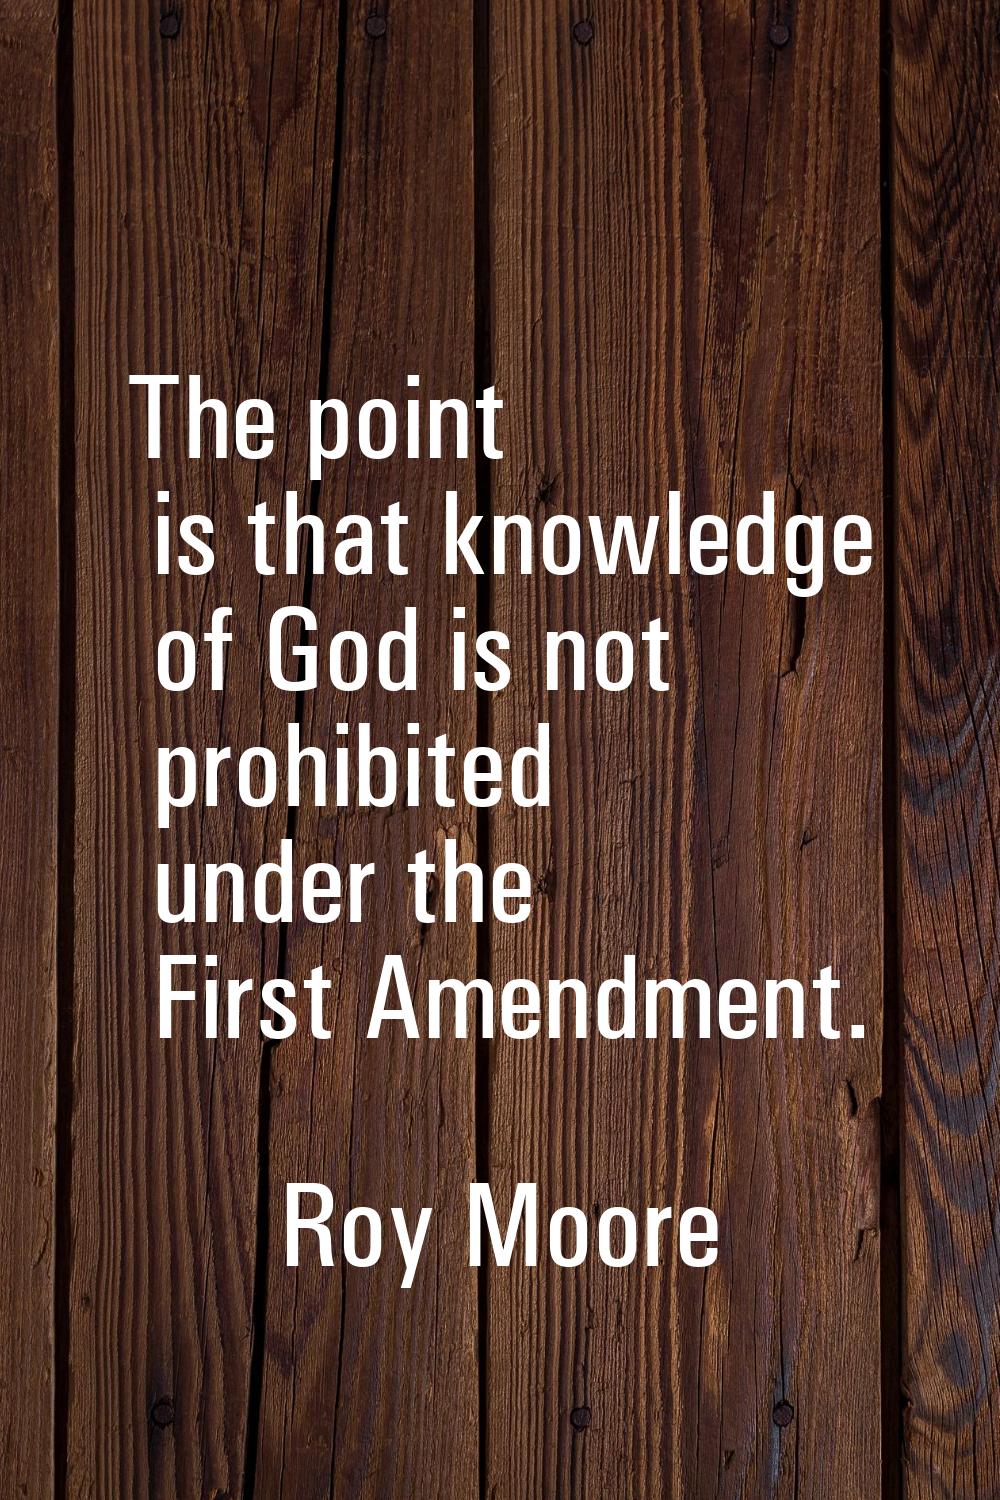 The point is that knowledge of God is not prohibited under the First Amendment.